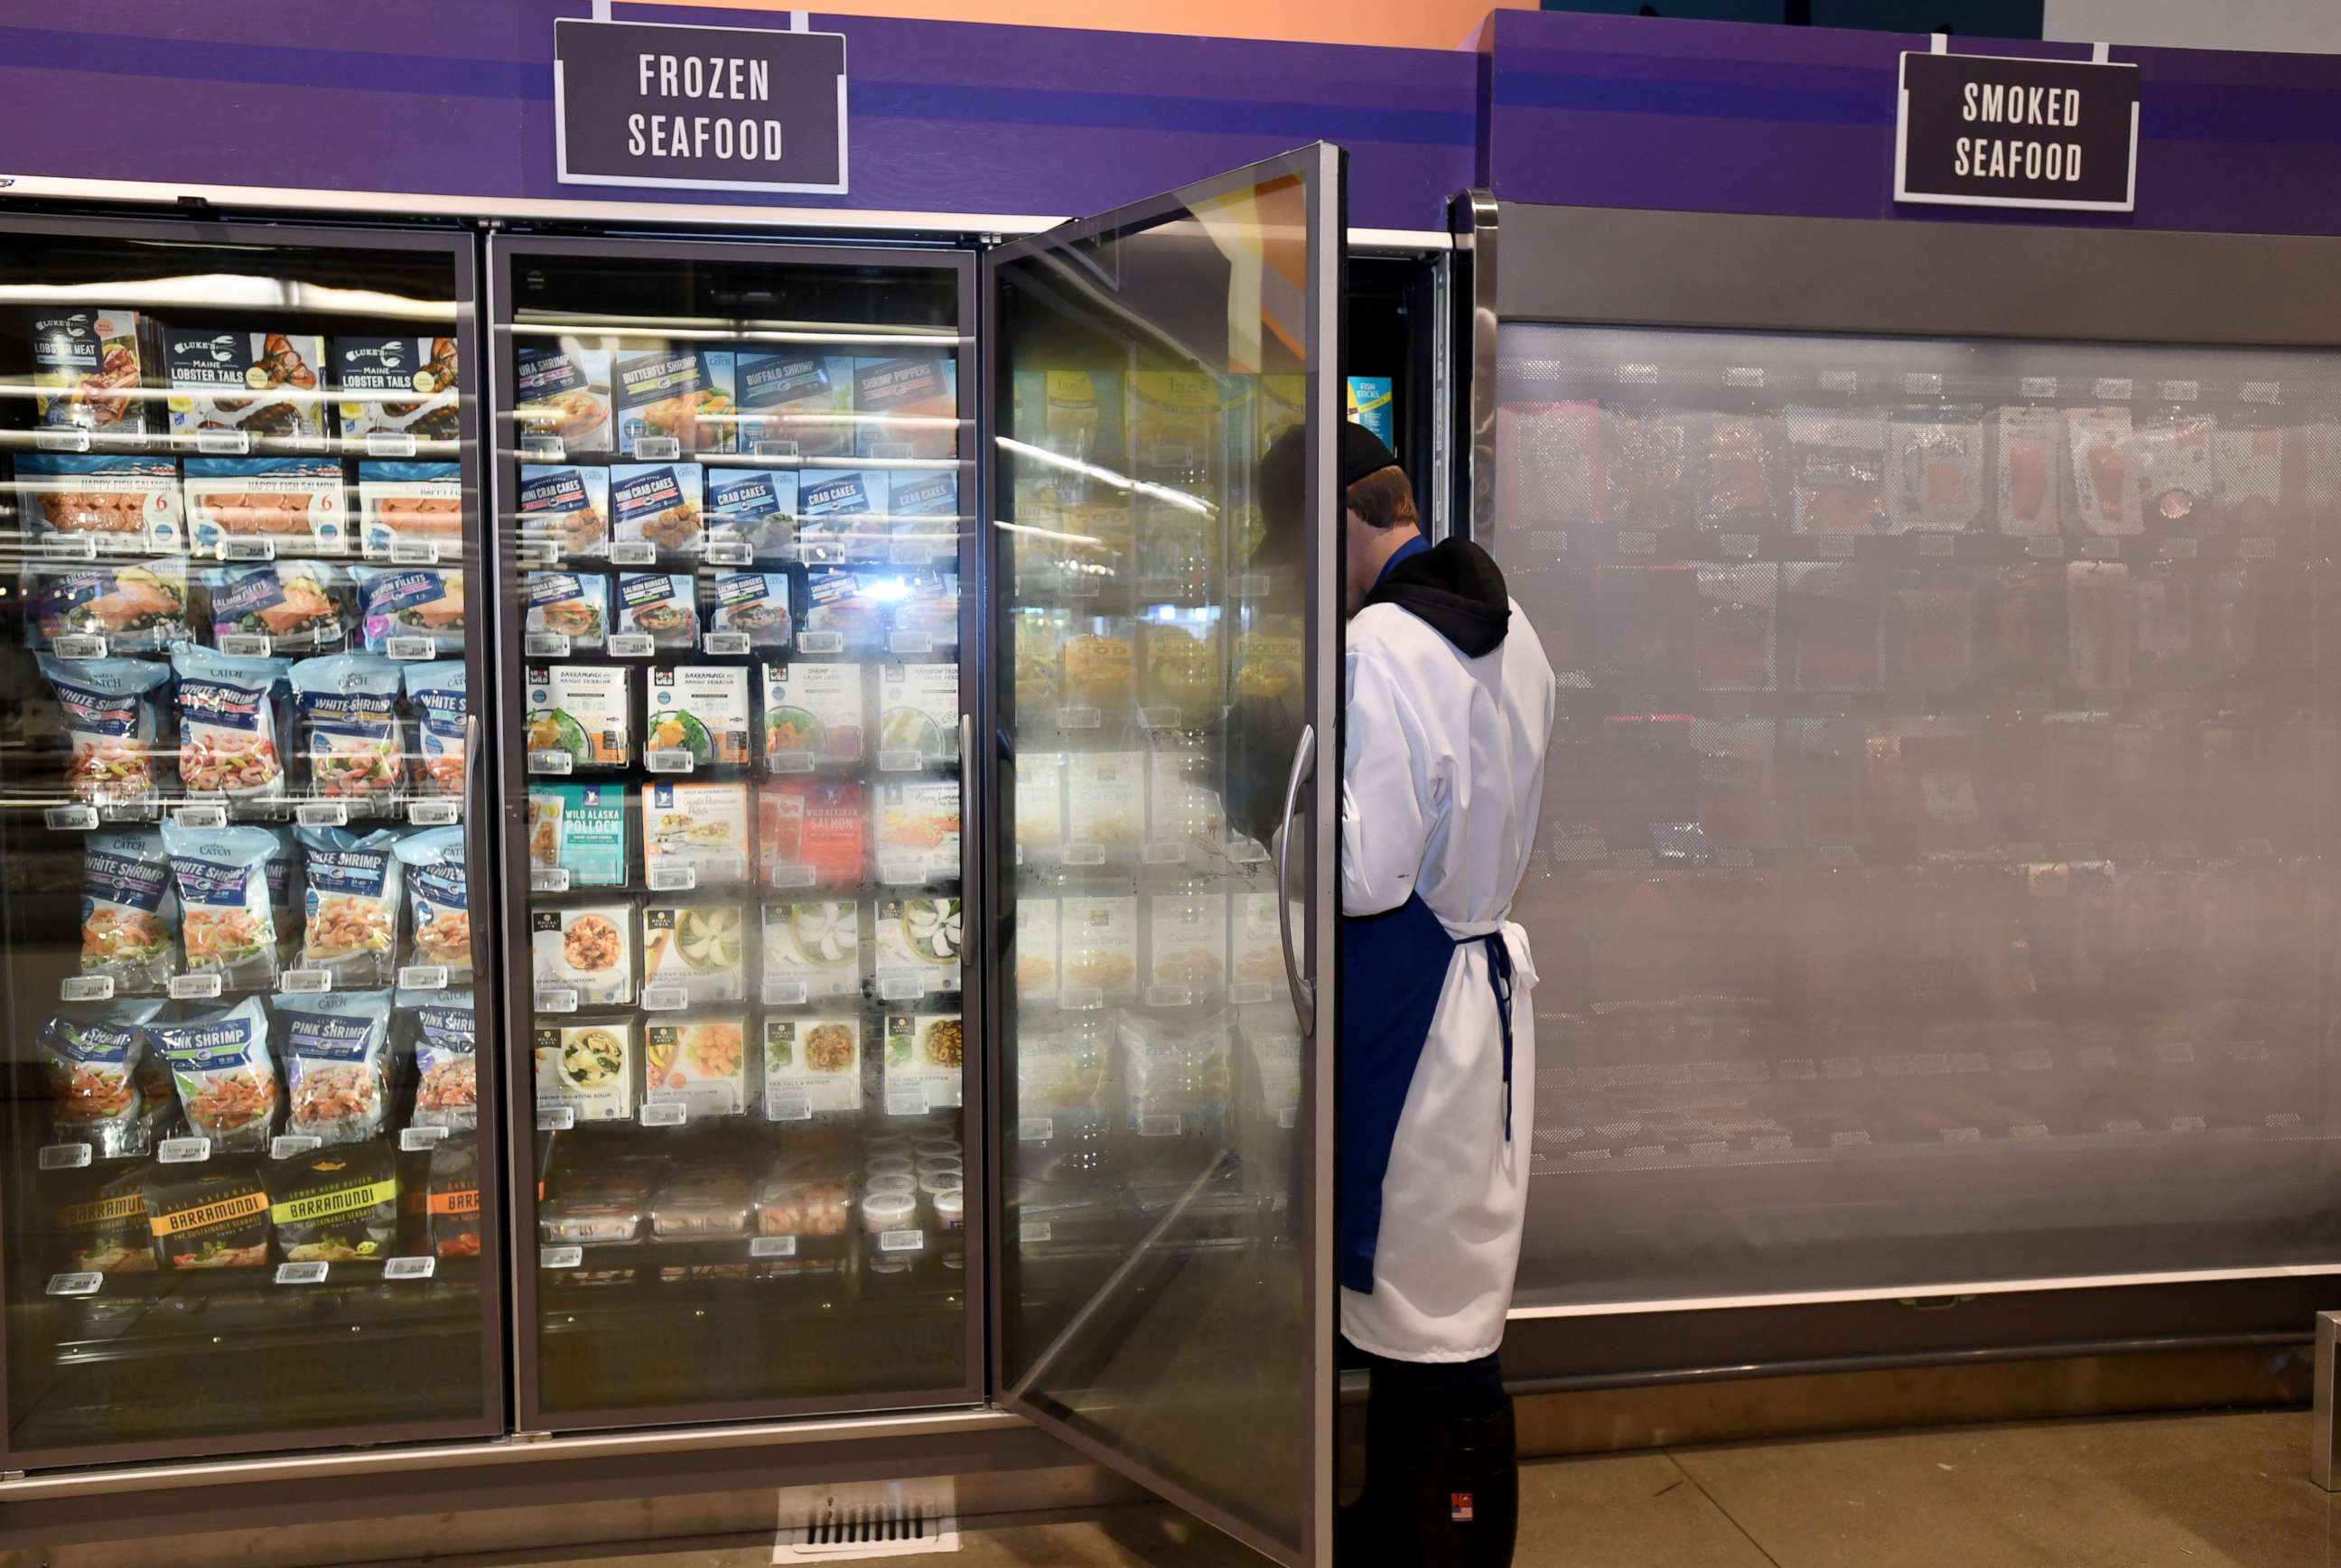 PHOTO: A store employee works in the frozen seafood section at a Whole Foods in Long Beach, Calif., Oct. 22, 2019.